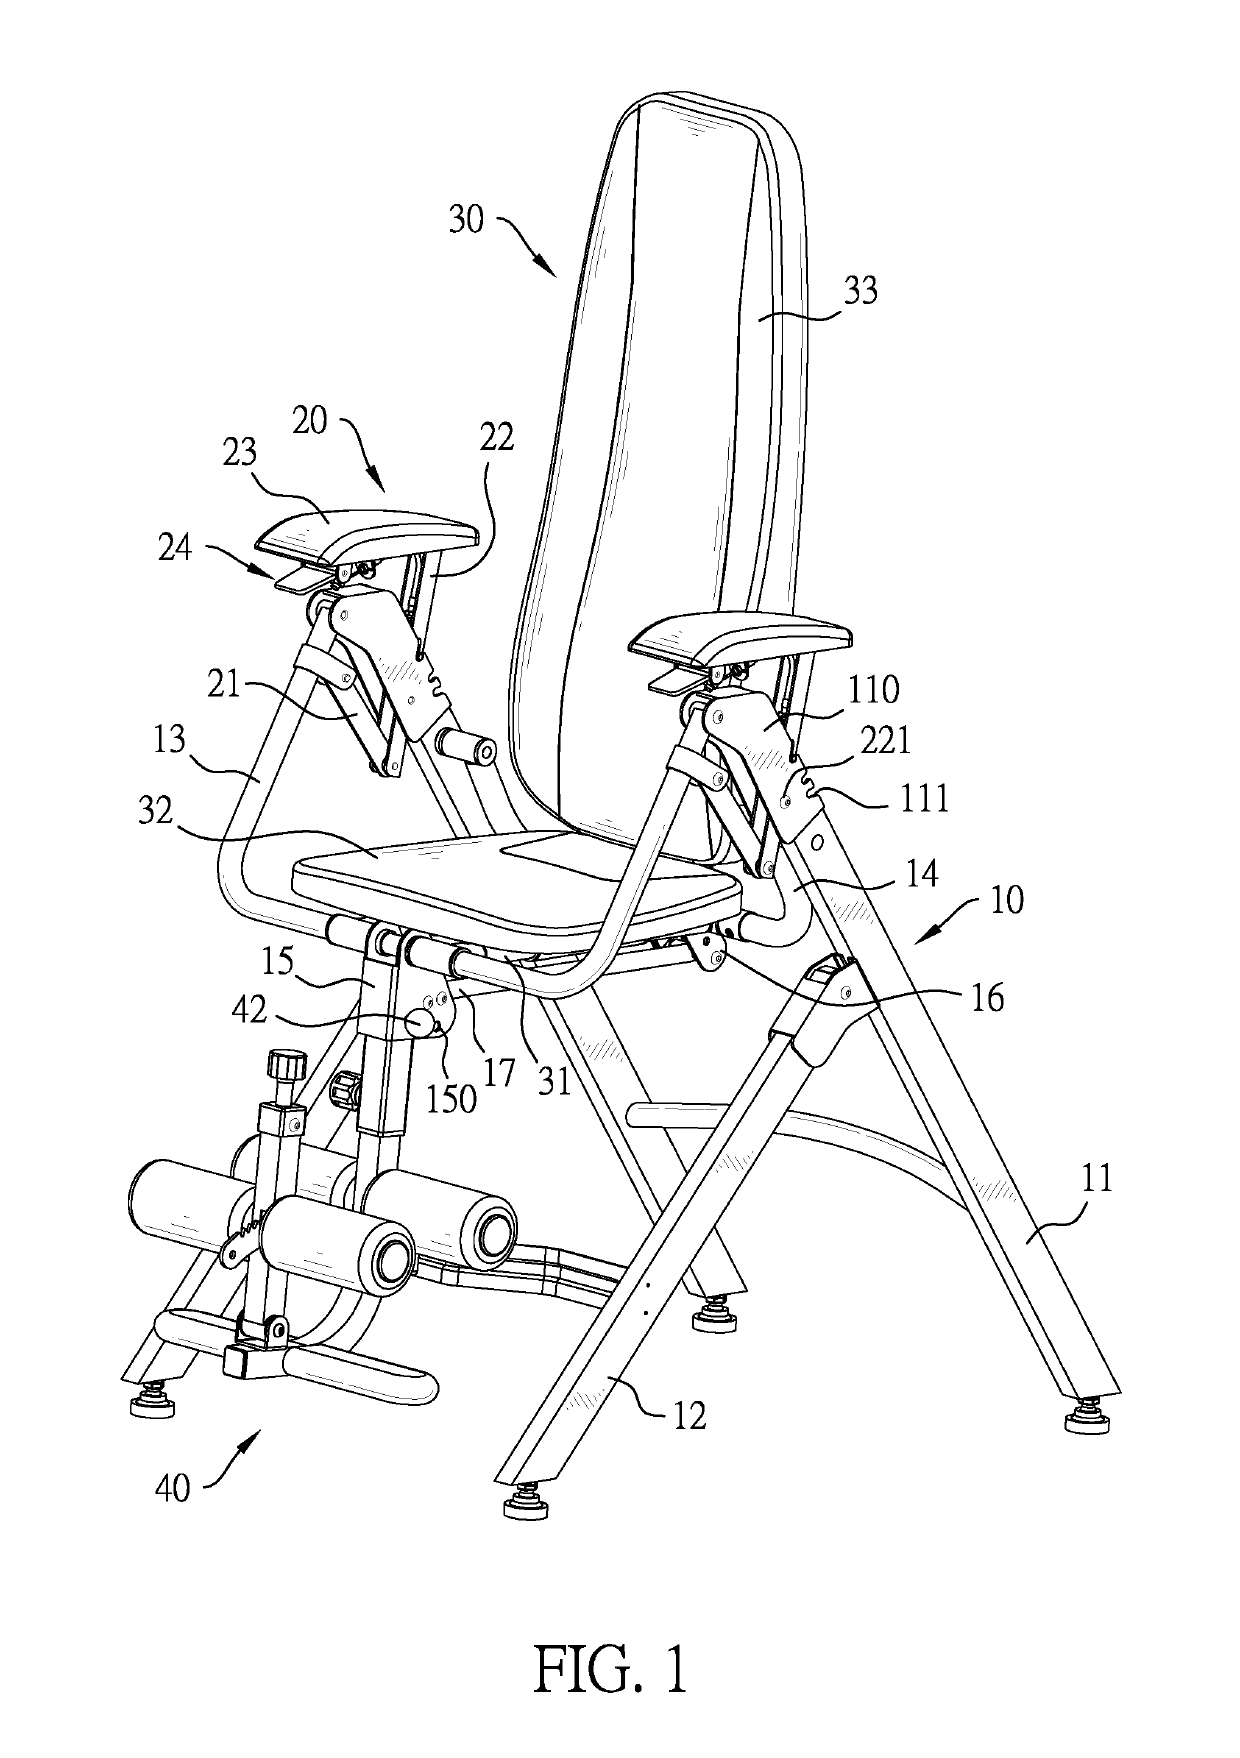 Seated inversion table